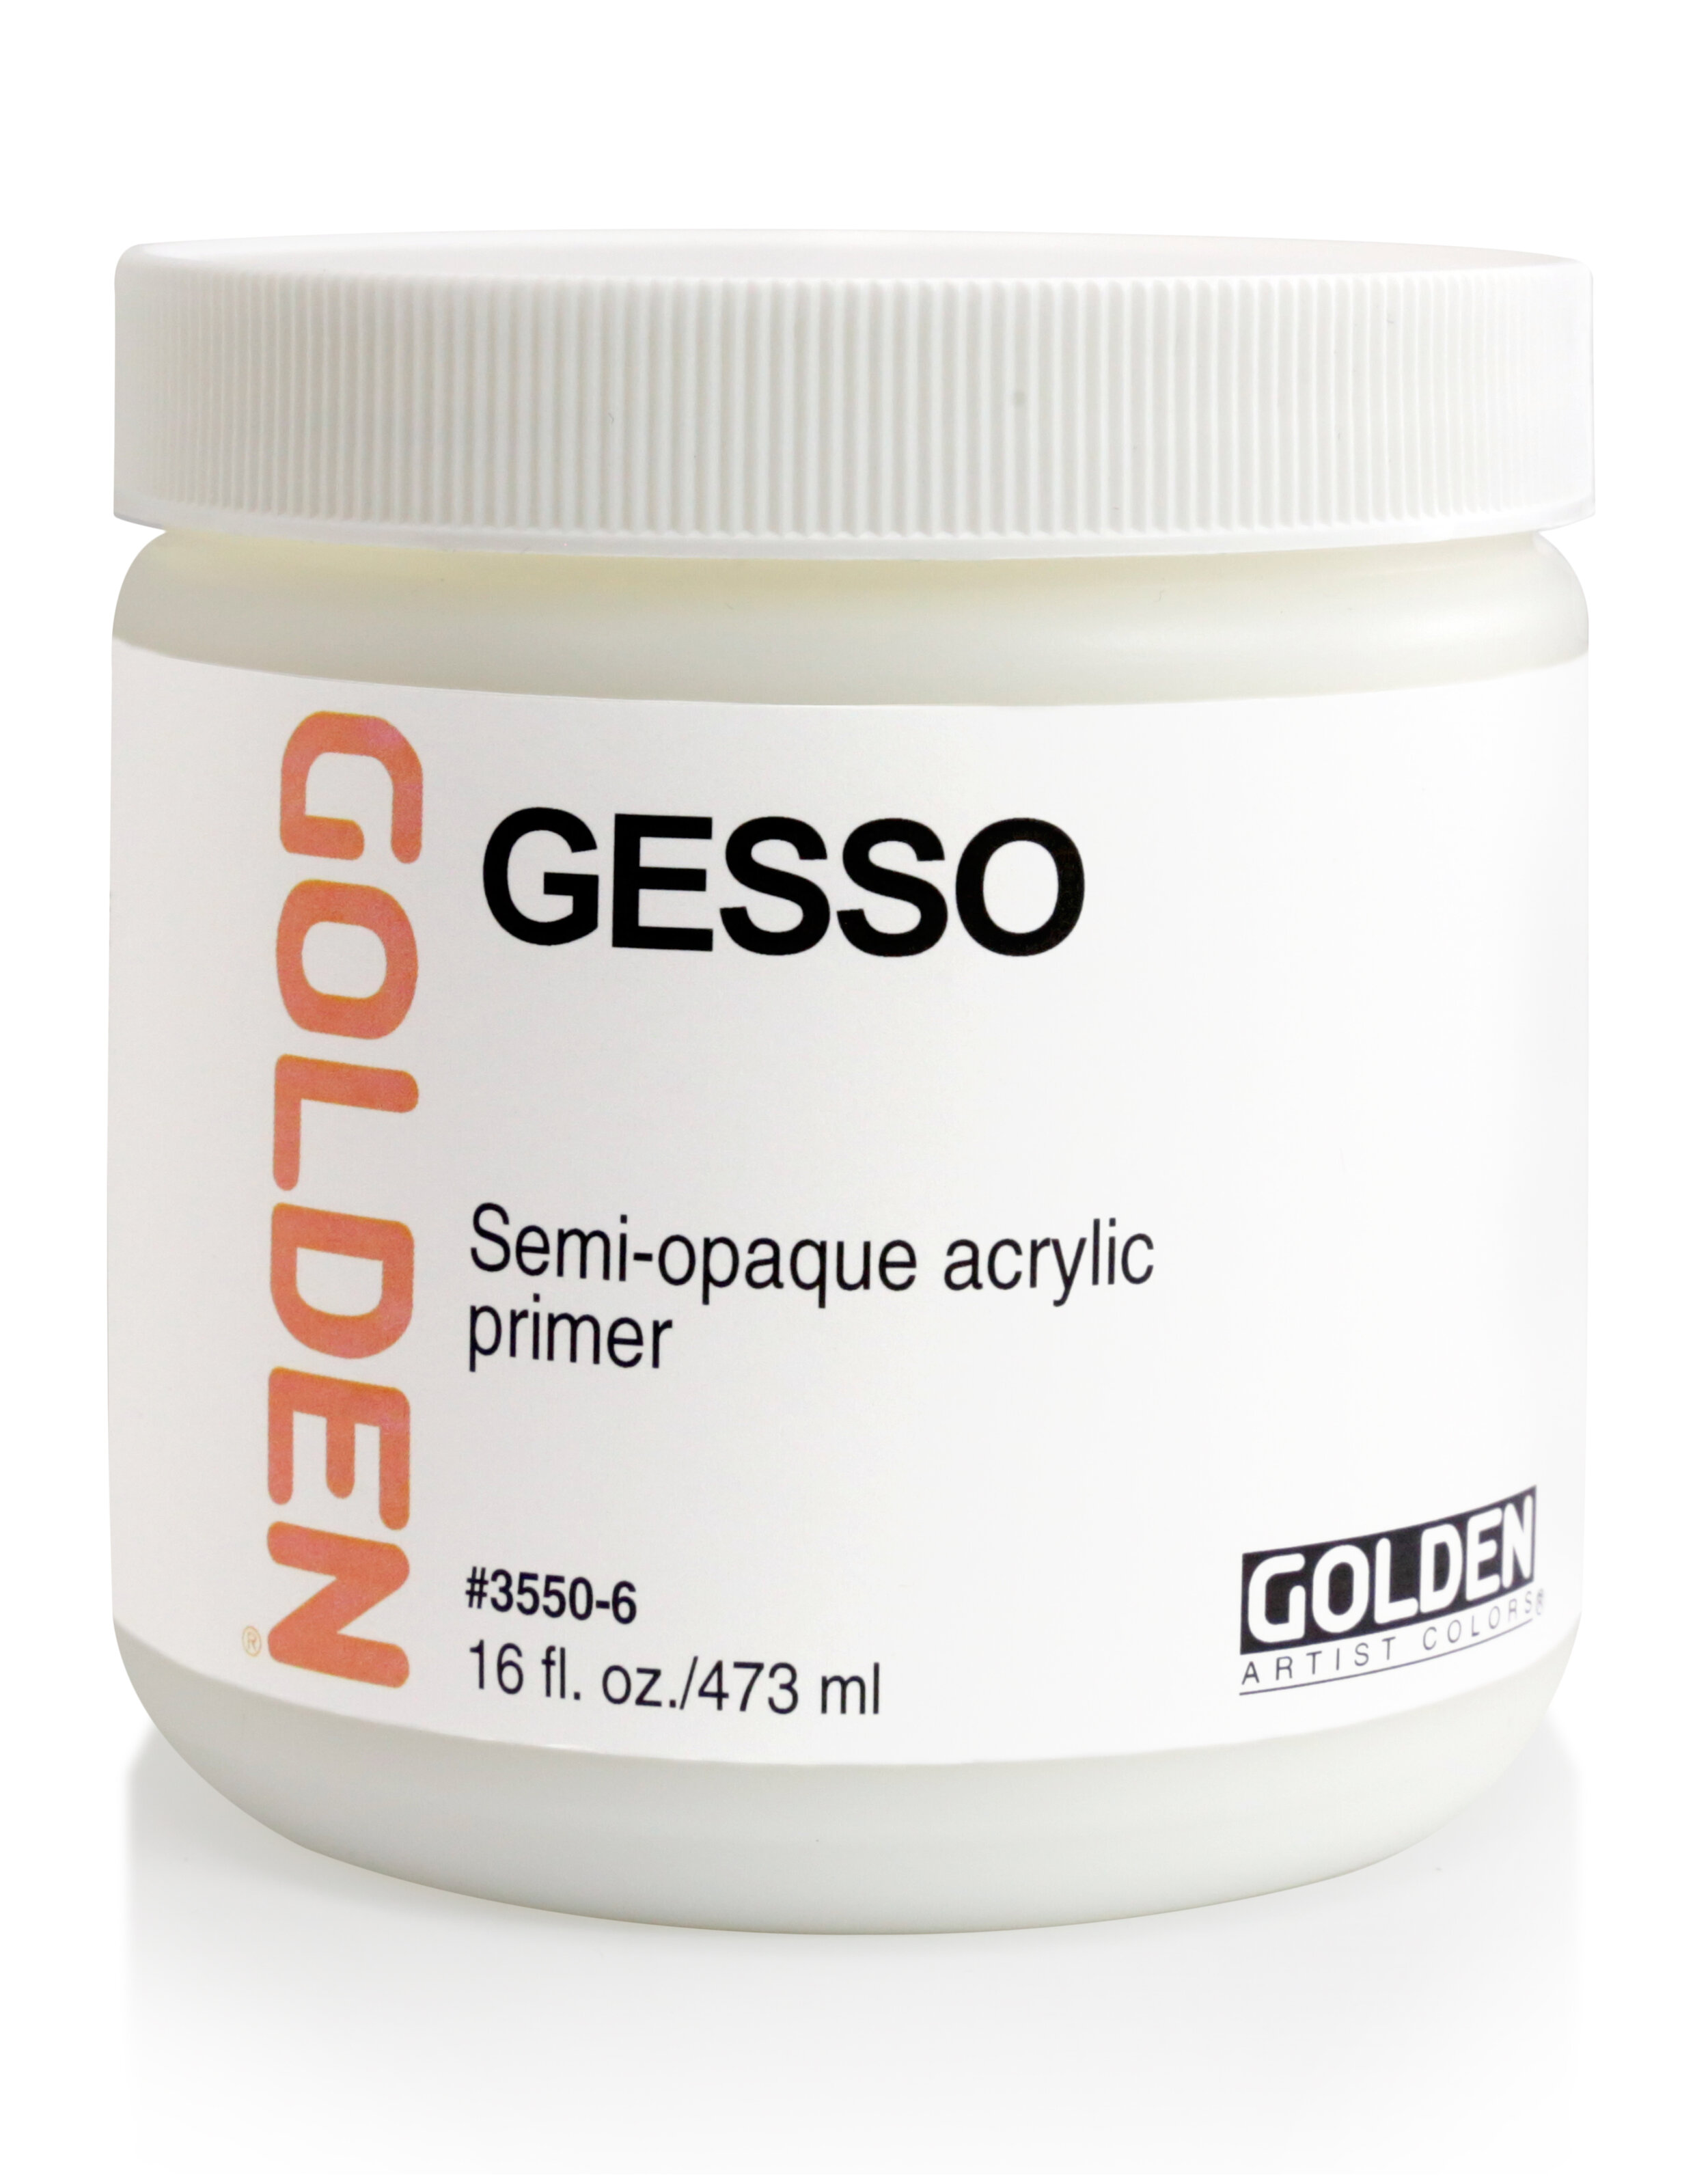 What is Gesso, Size and Ground?